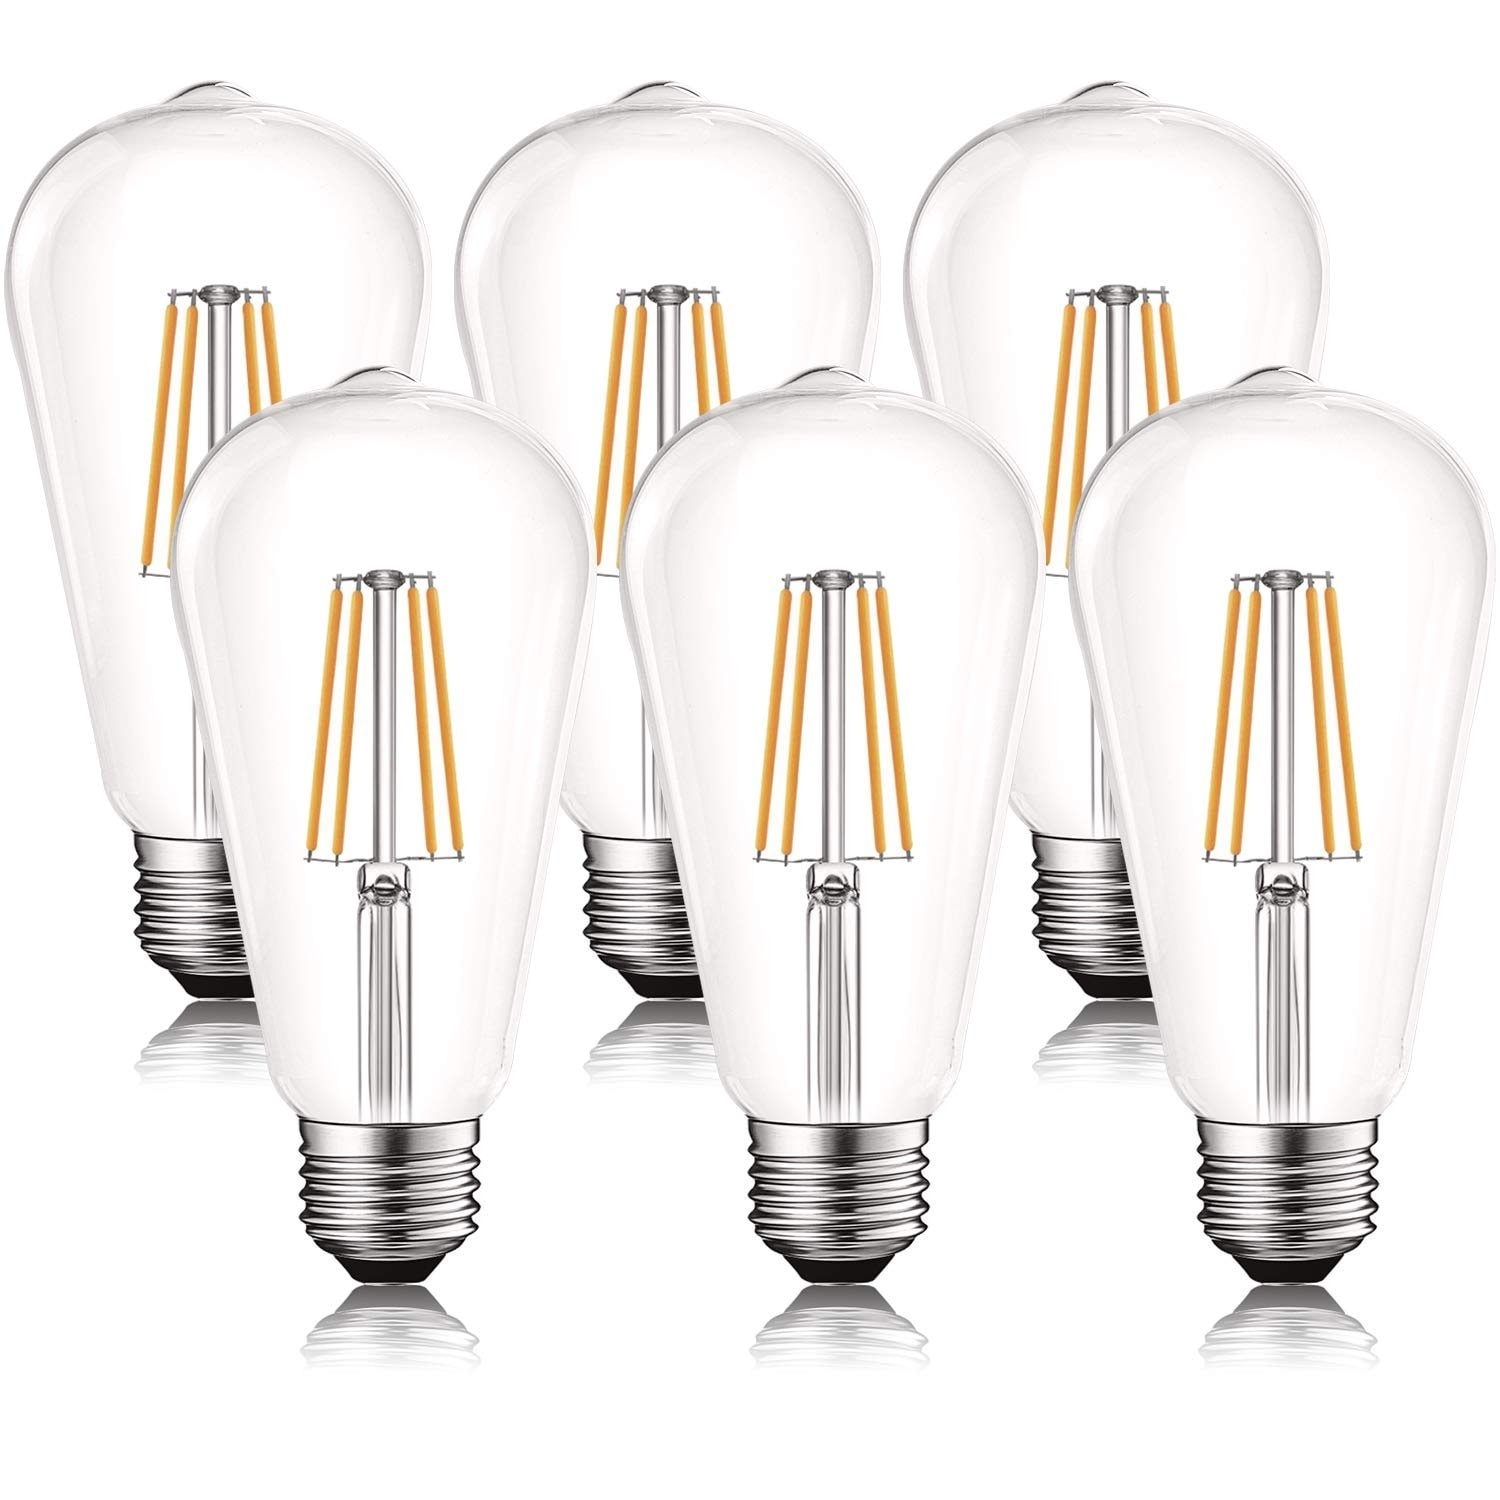 Wall Sconce Pendant Chandelier Pack of 6 LED Edison Bulb Dimmable 60W Equivalent ST64 6W Decorative Vintage Light Bulbs 2700K Amber Warm White E26 Base for Farmhouse